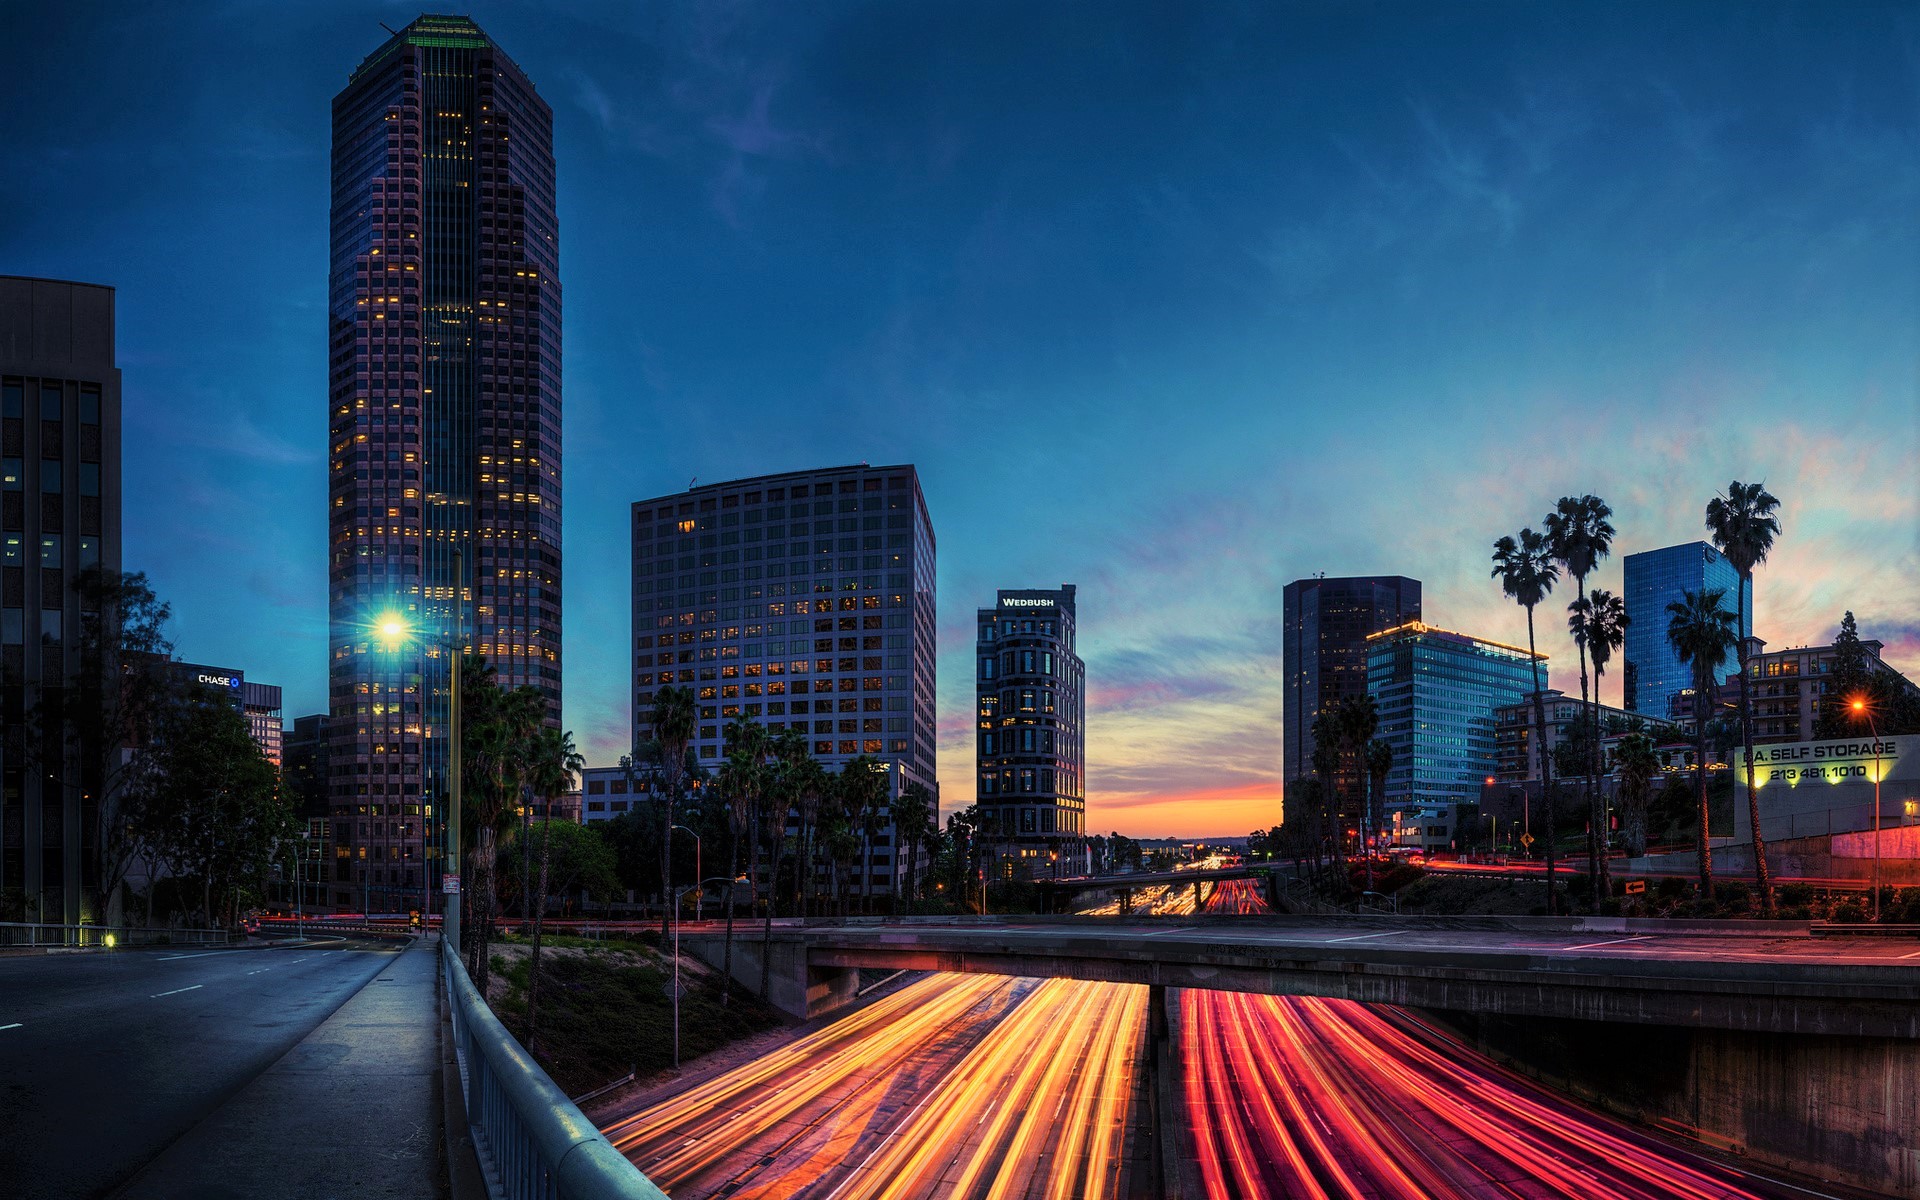 Los Angeles Night Light trails Cityscape Skyscraper HD Wallpapers   Desktop and Mobile Images  Photos